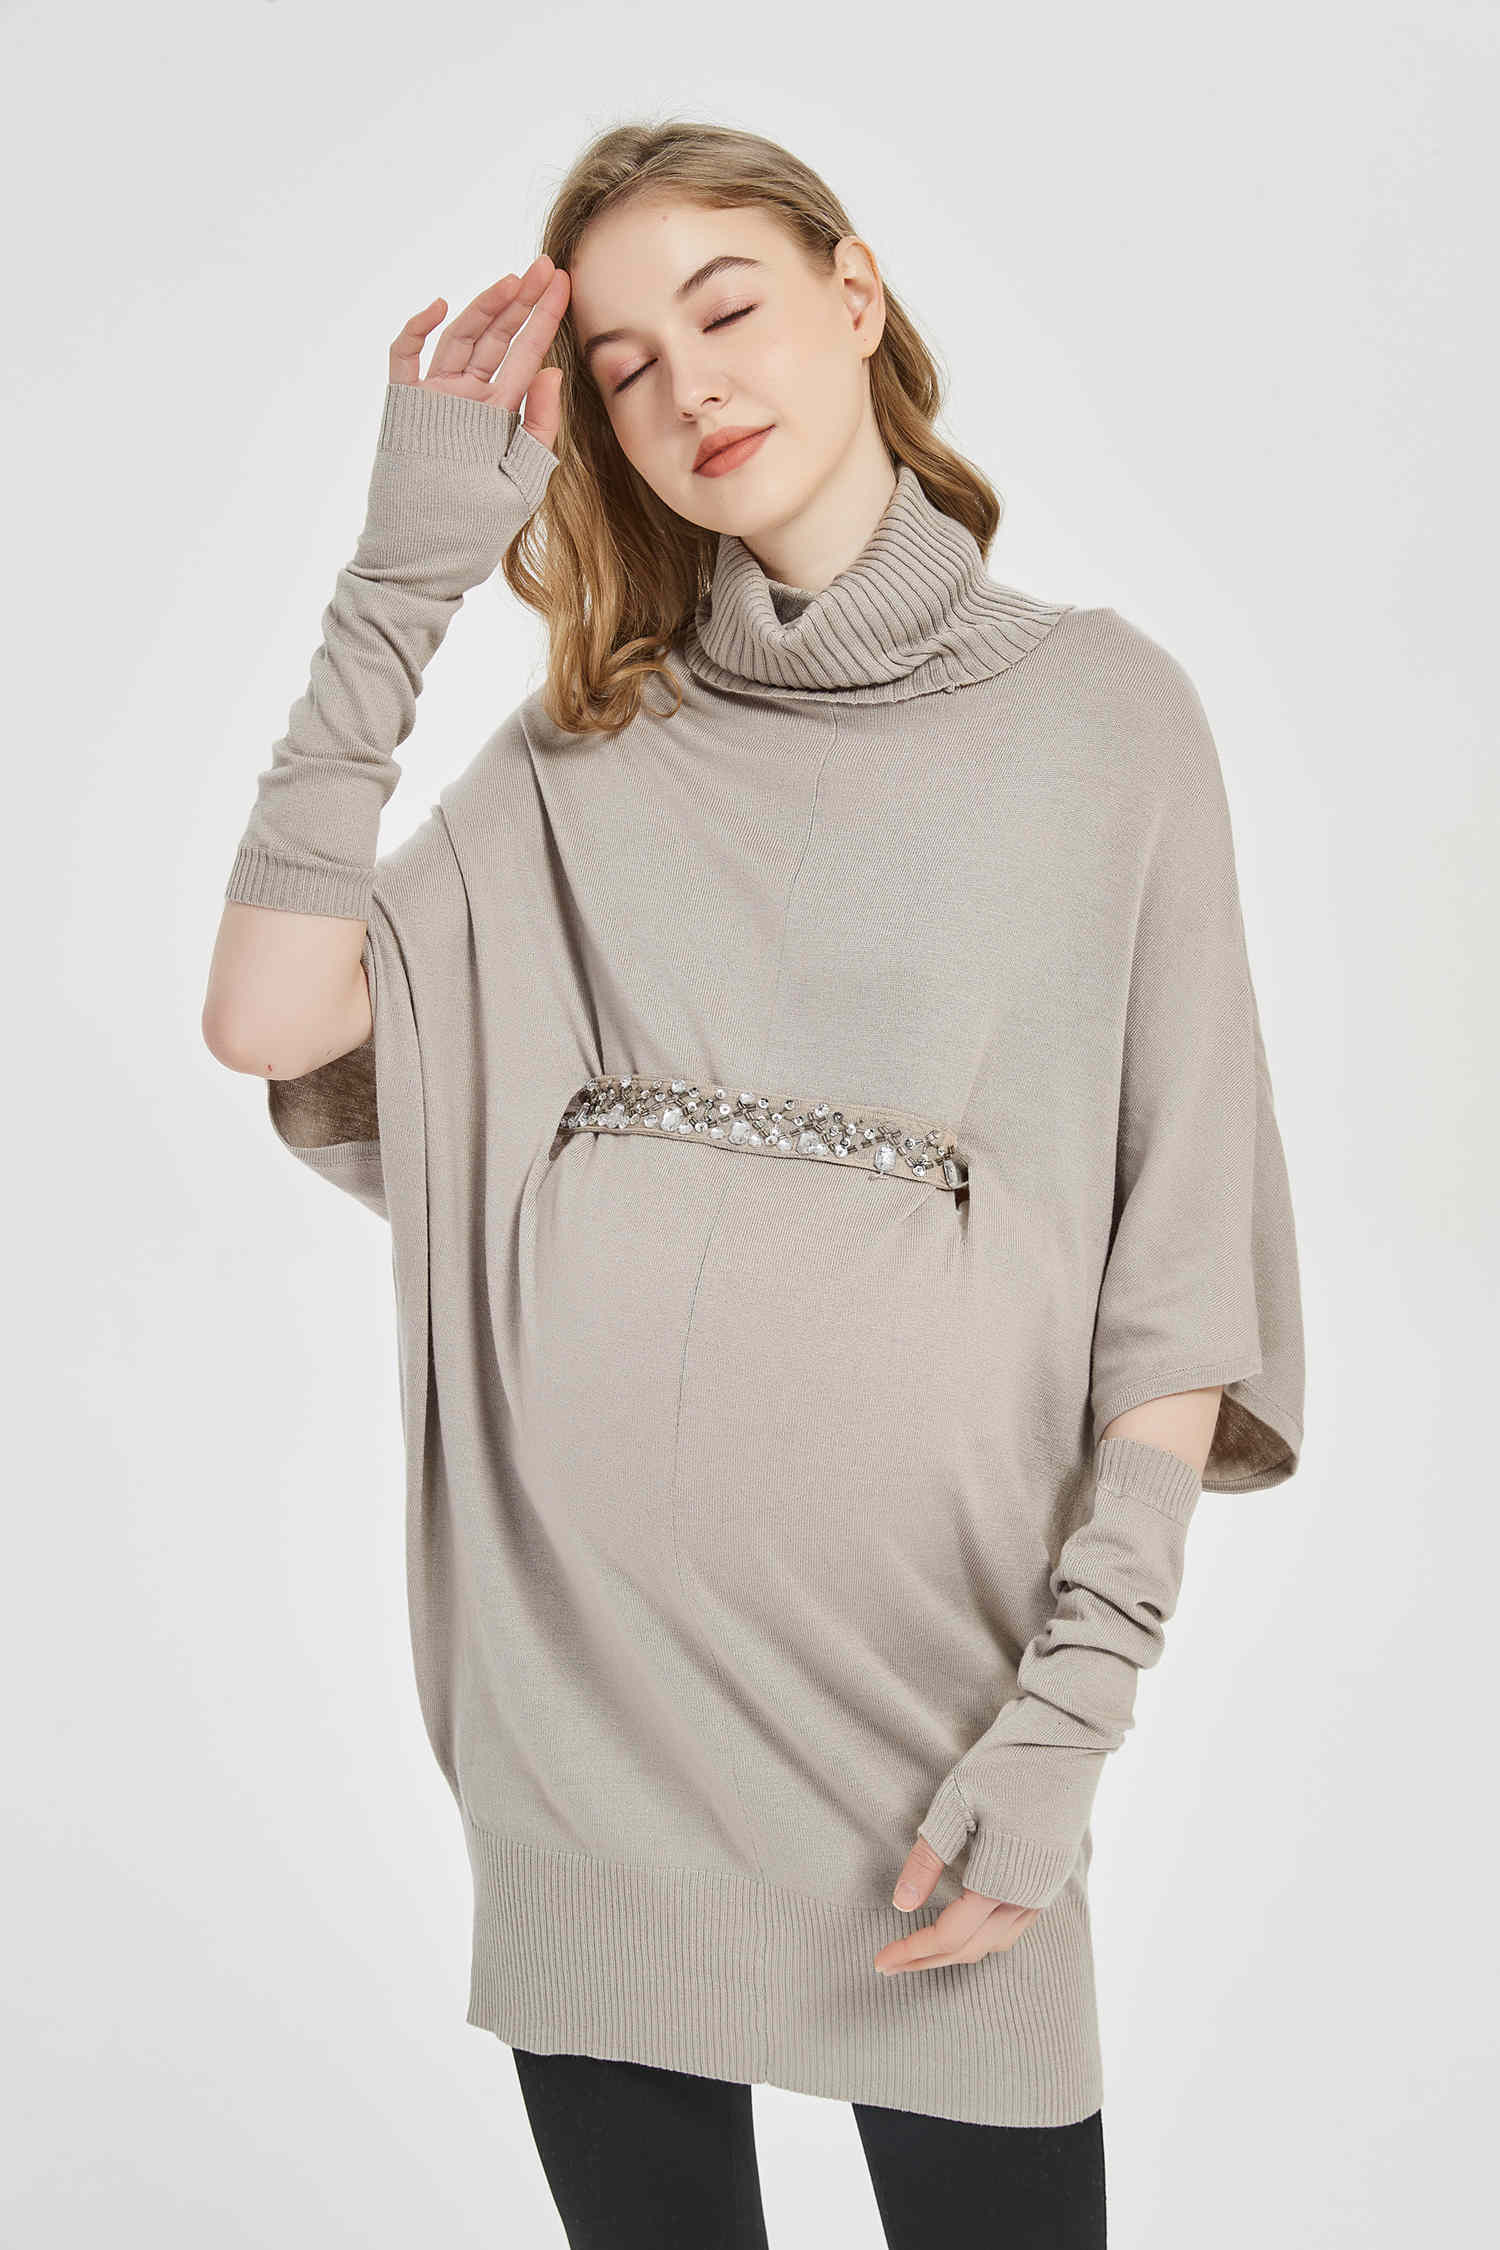 Advantages of maternity cashmere sweater